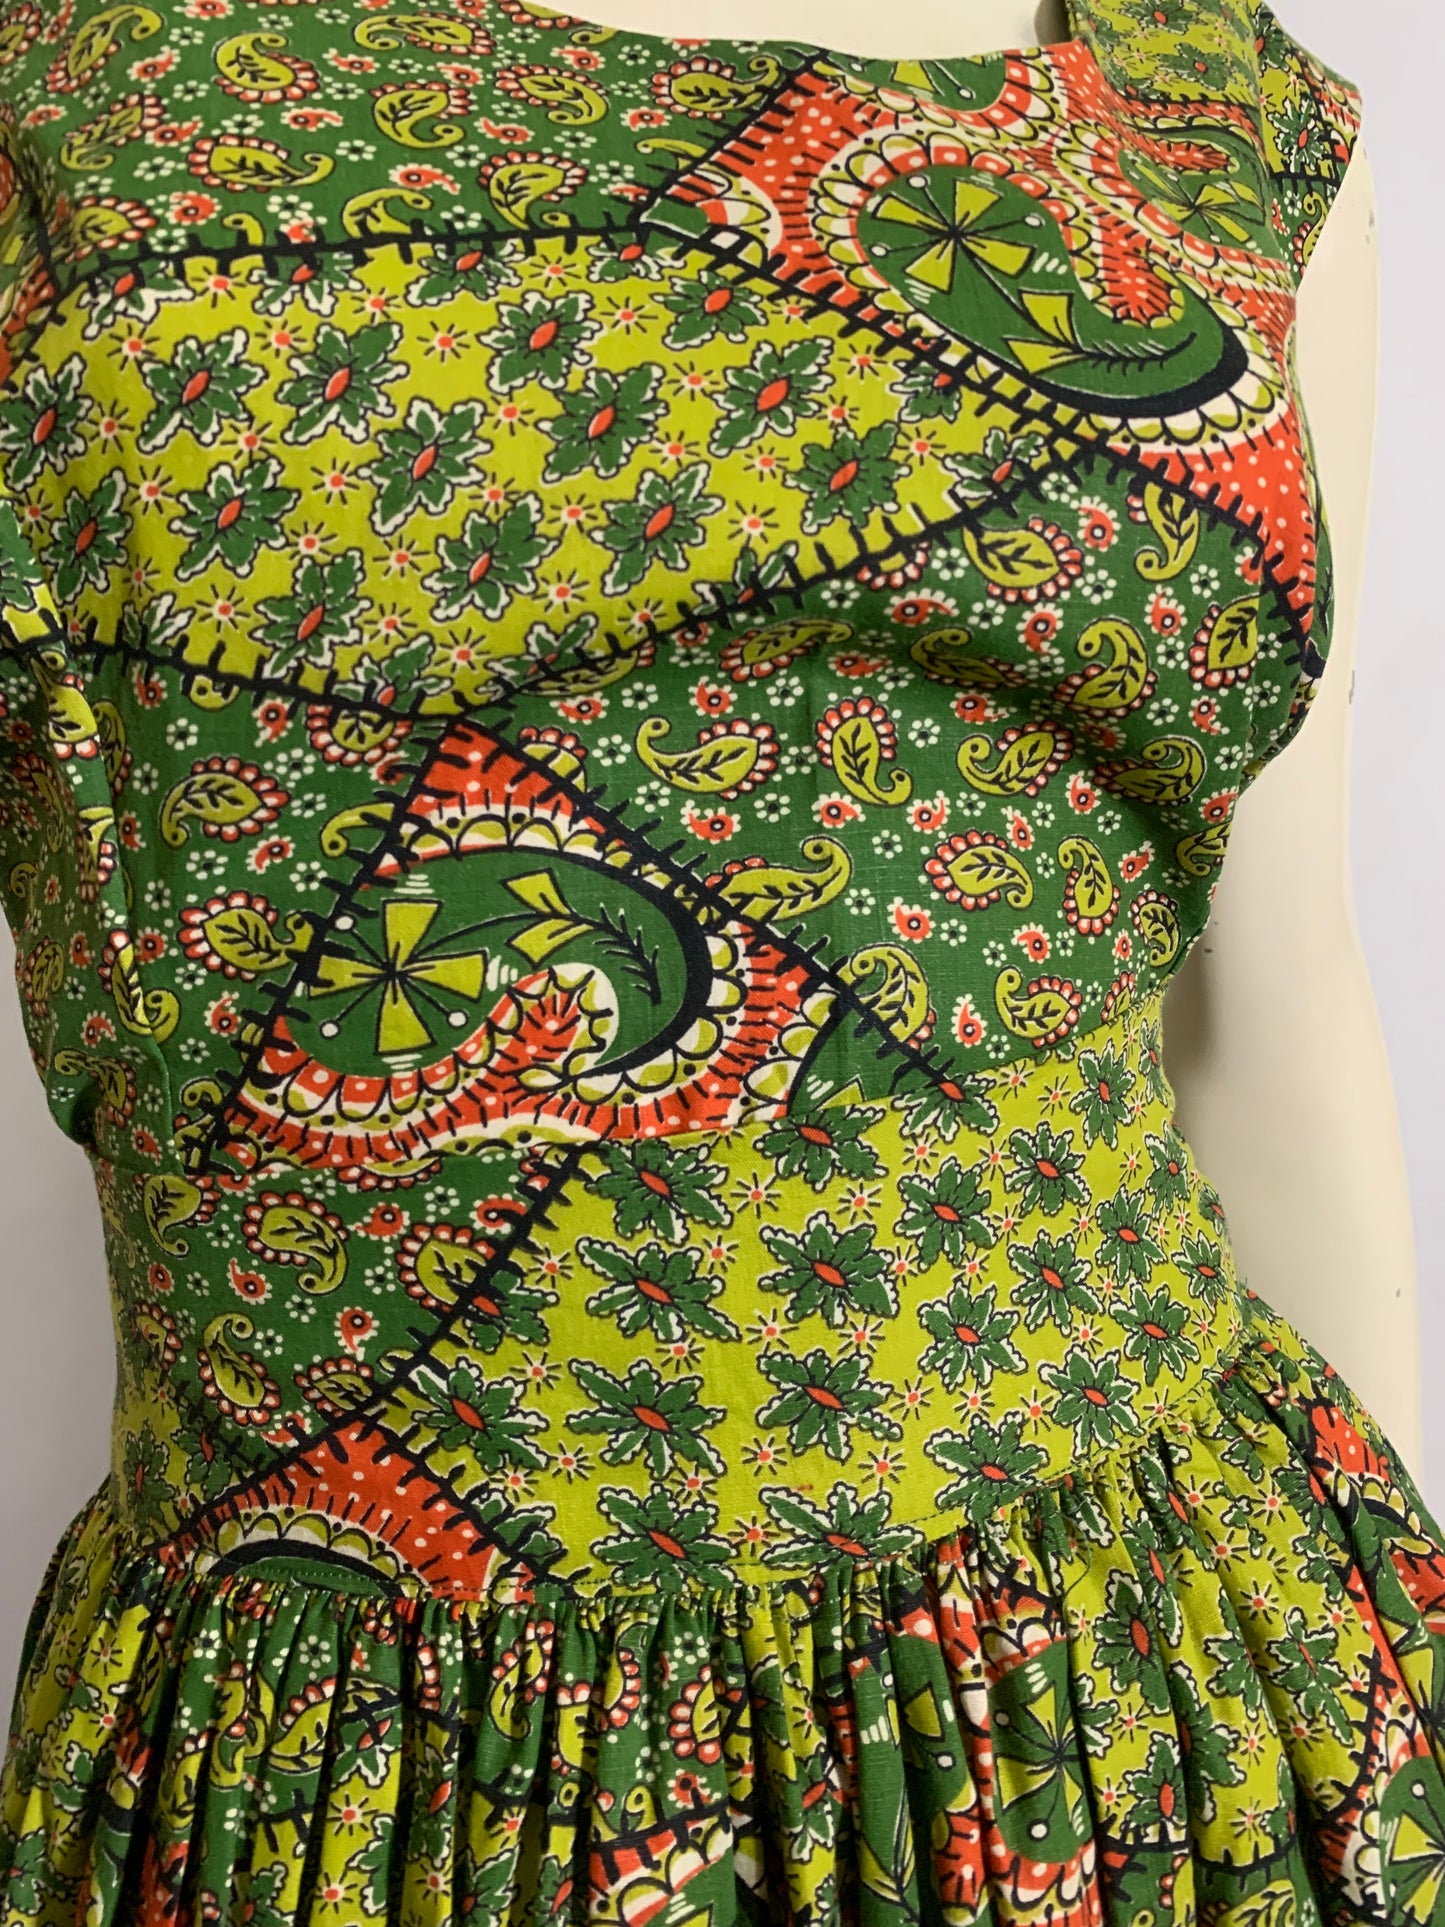 Green and Red Paisley and Patchwork Print Cotton Full Skirt 2 Pc Dress Set circa 1950s